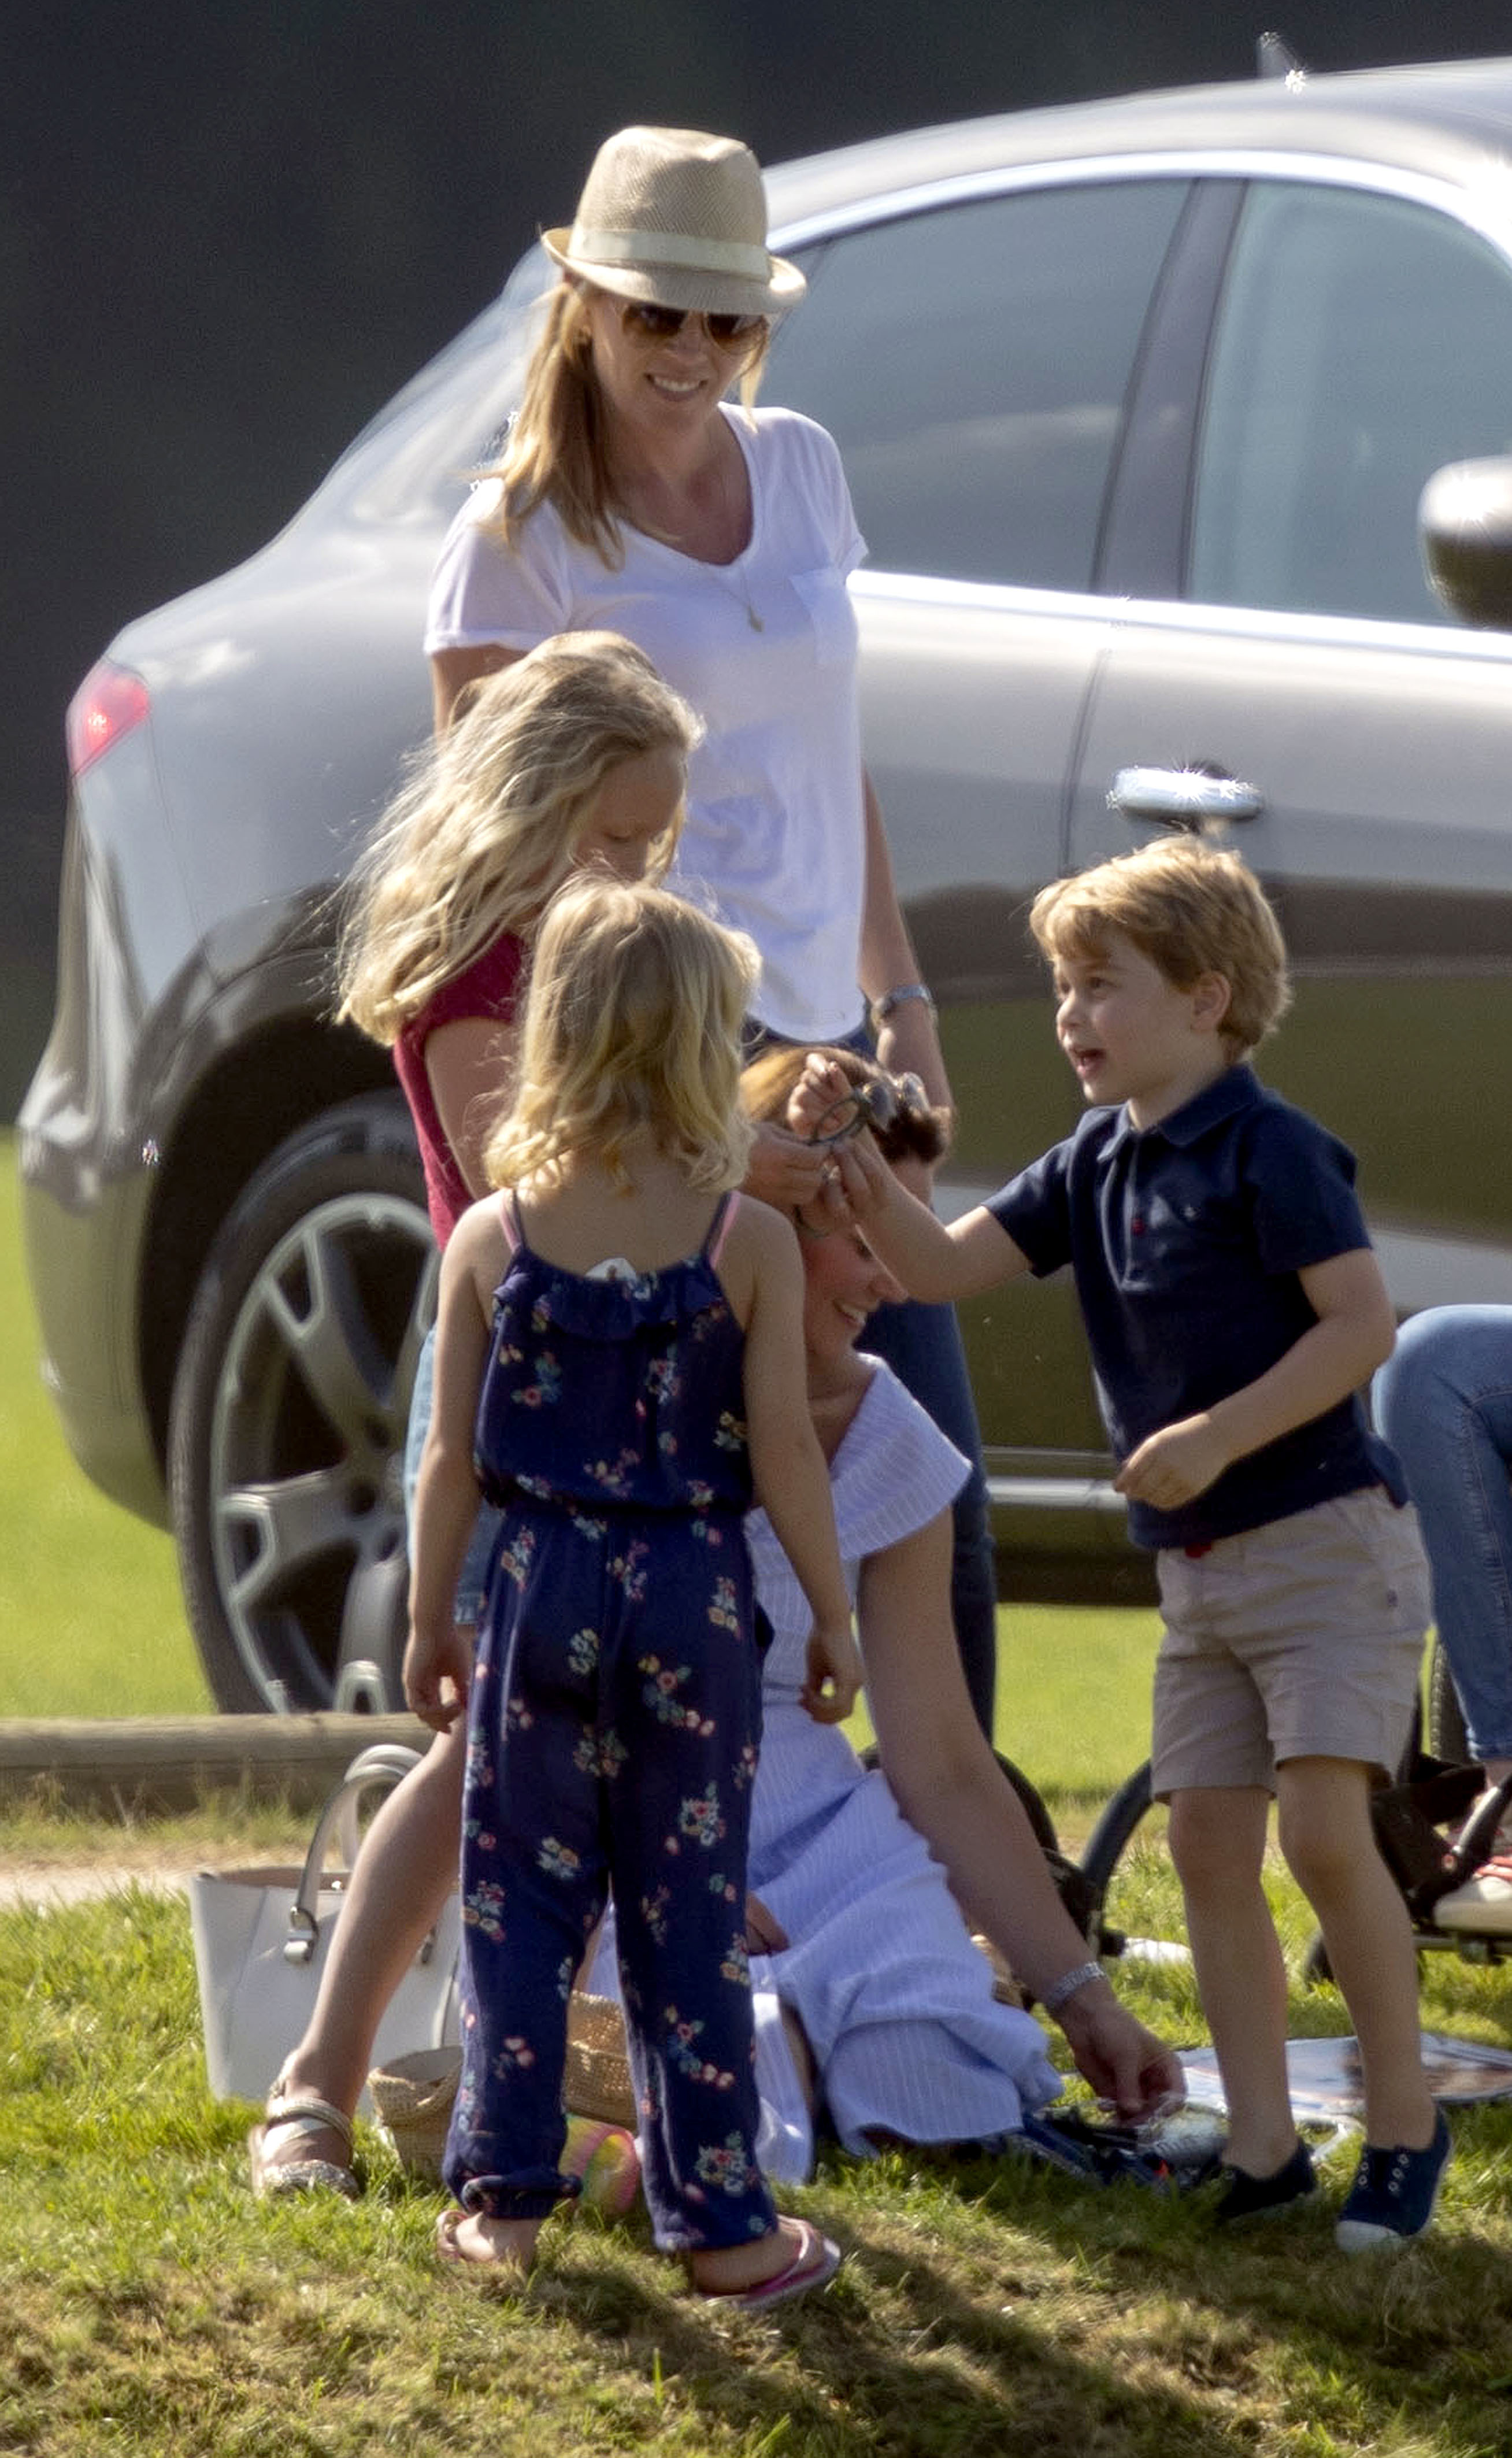 The Duchess of Cambridge (sitting) with Prince George and Autumn Phillips and her children, Savannah and Isla, as her husband the Duke of Cambridge takes part in the Maserati Royal Charity Polo Trophy at the Beaufort Polo Club, Downfarm House, Westonbirt, Tetbury